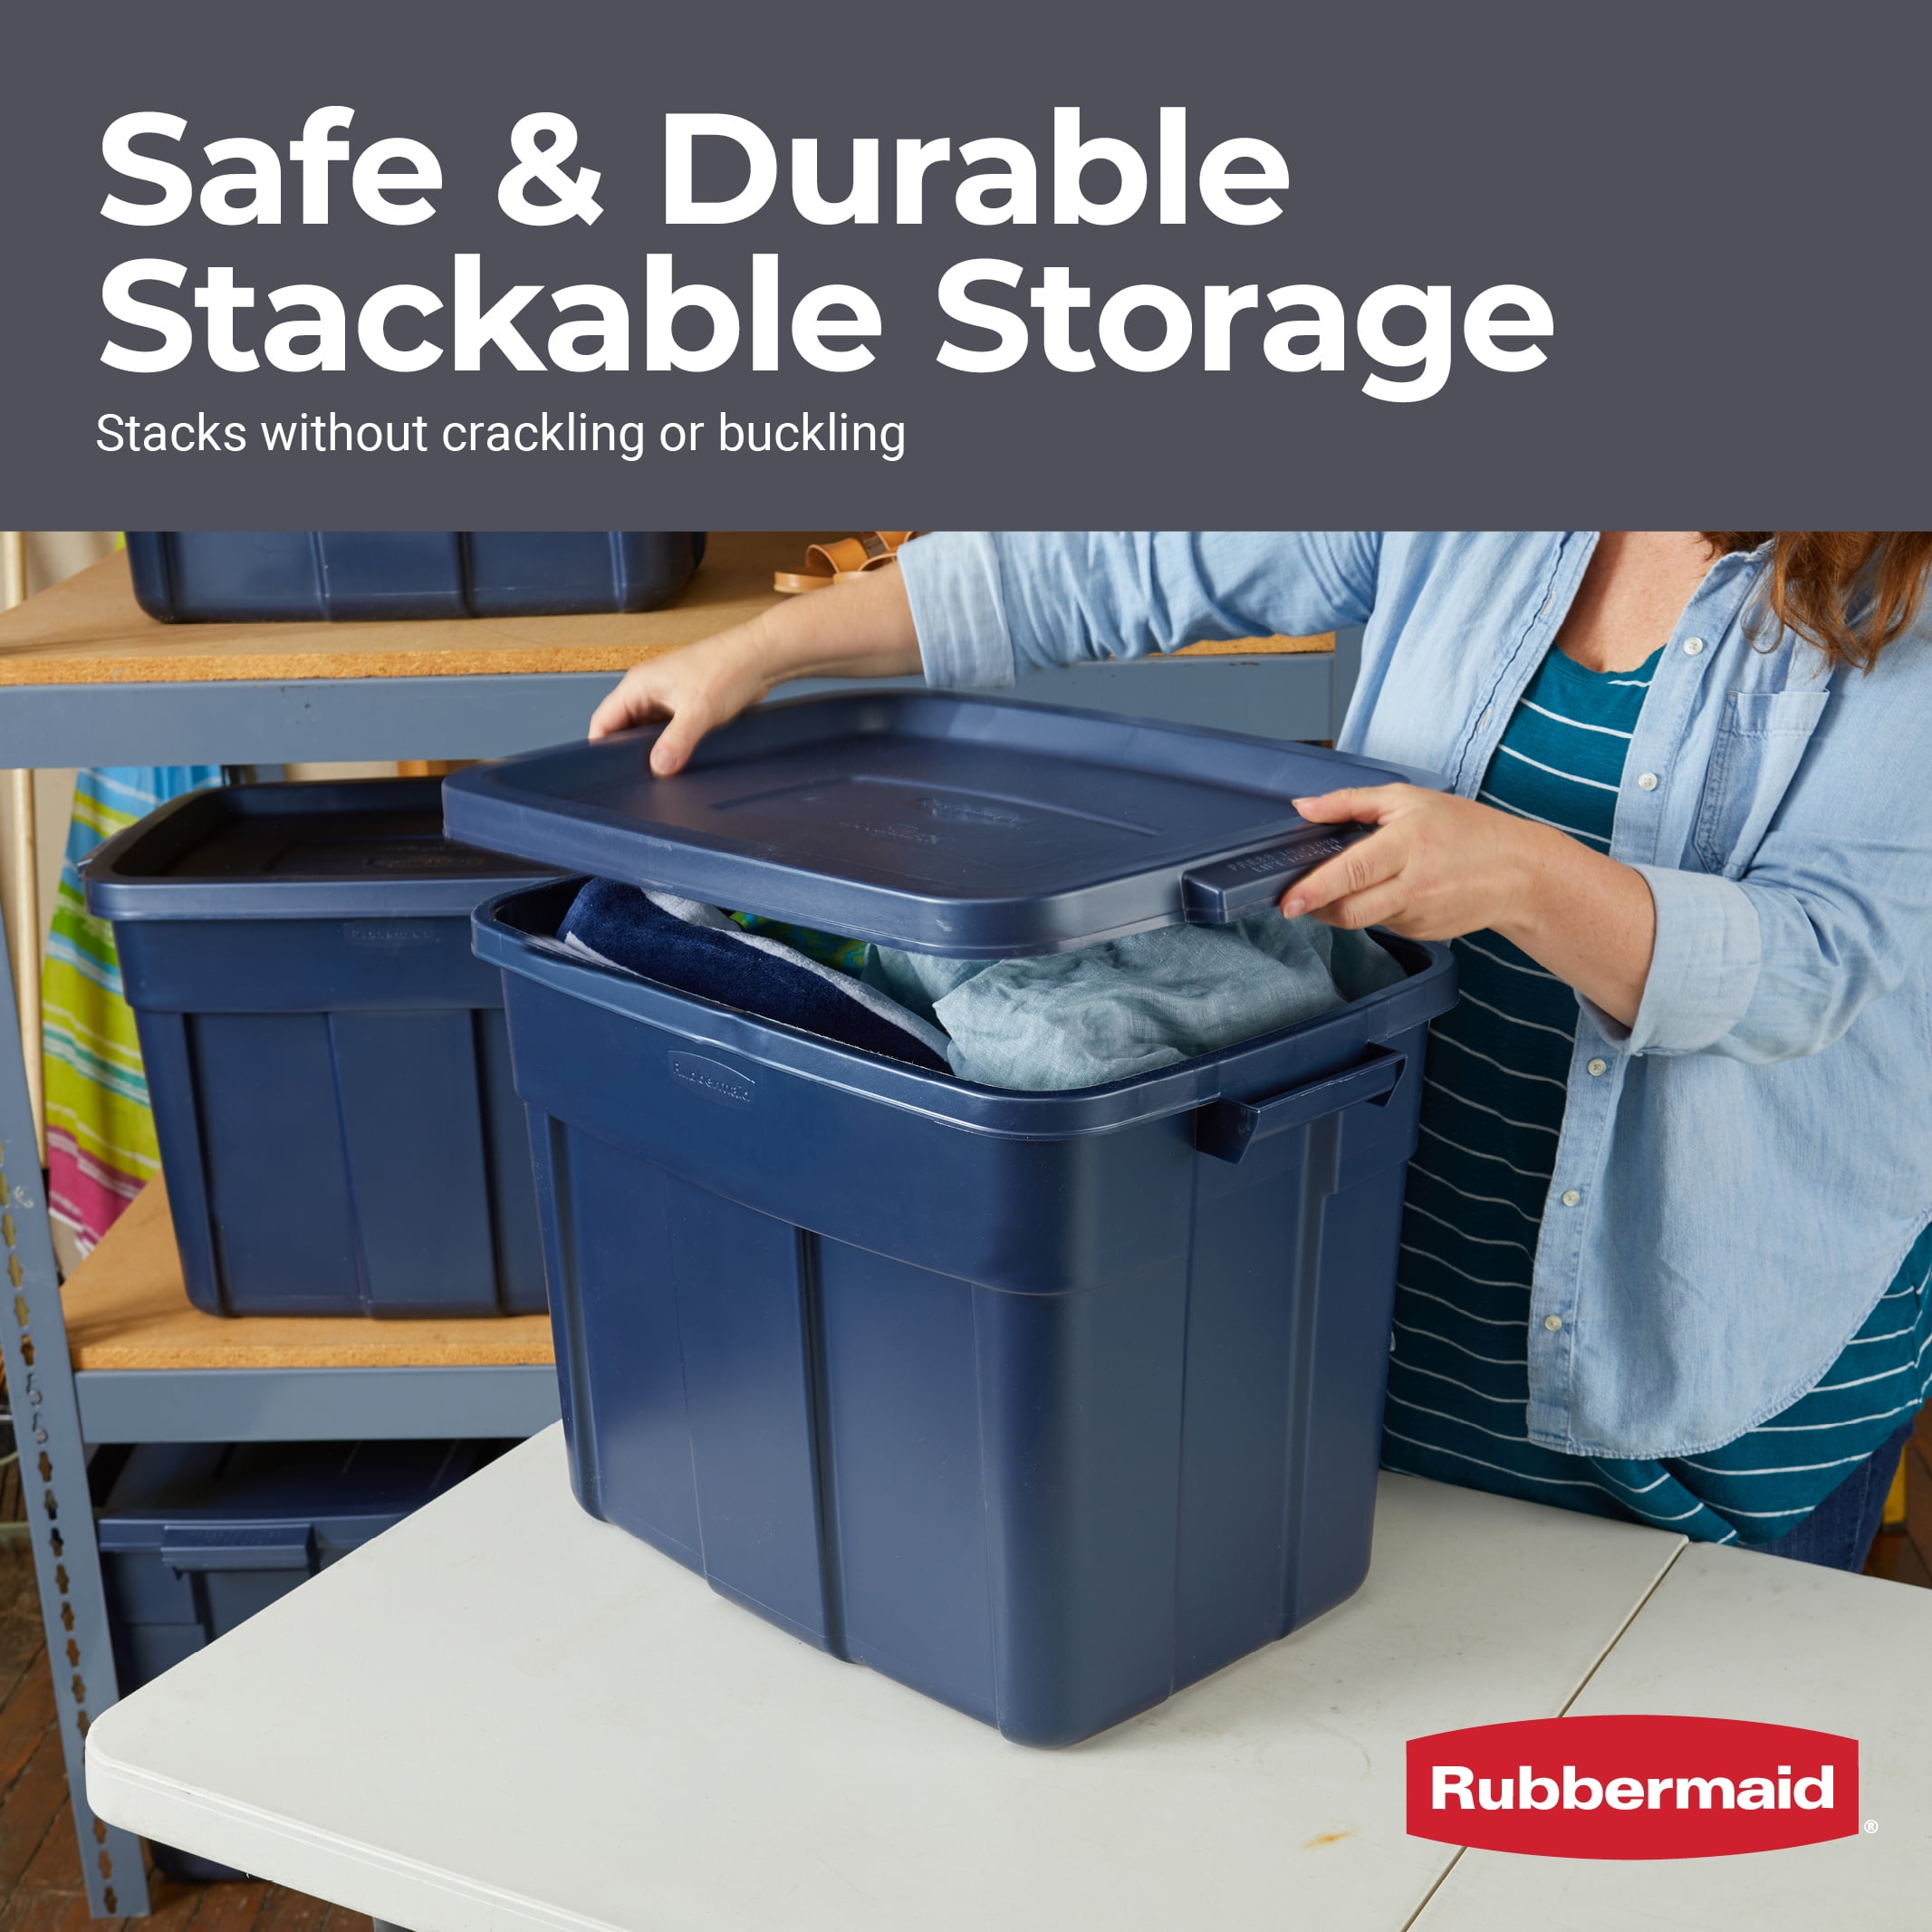 Rubbermaid Roughneck 18 gal Black/Gray Storage Box 16.5 in. H X 15.9 in. W  X 23.875 in. D Stackable - Ace Hardware